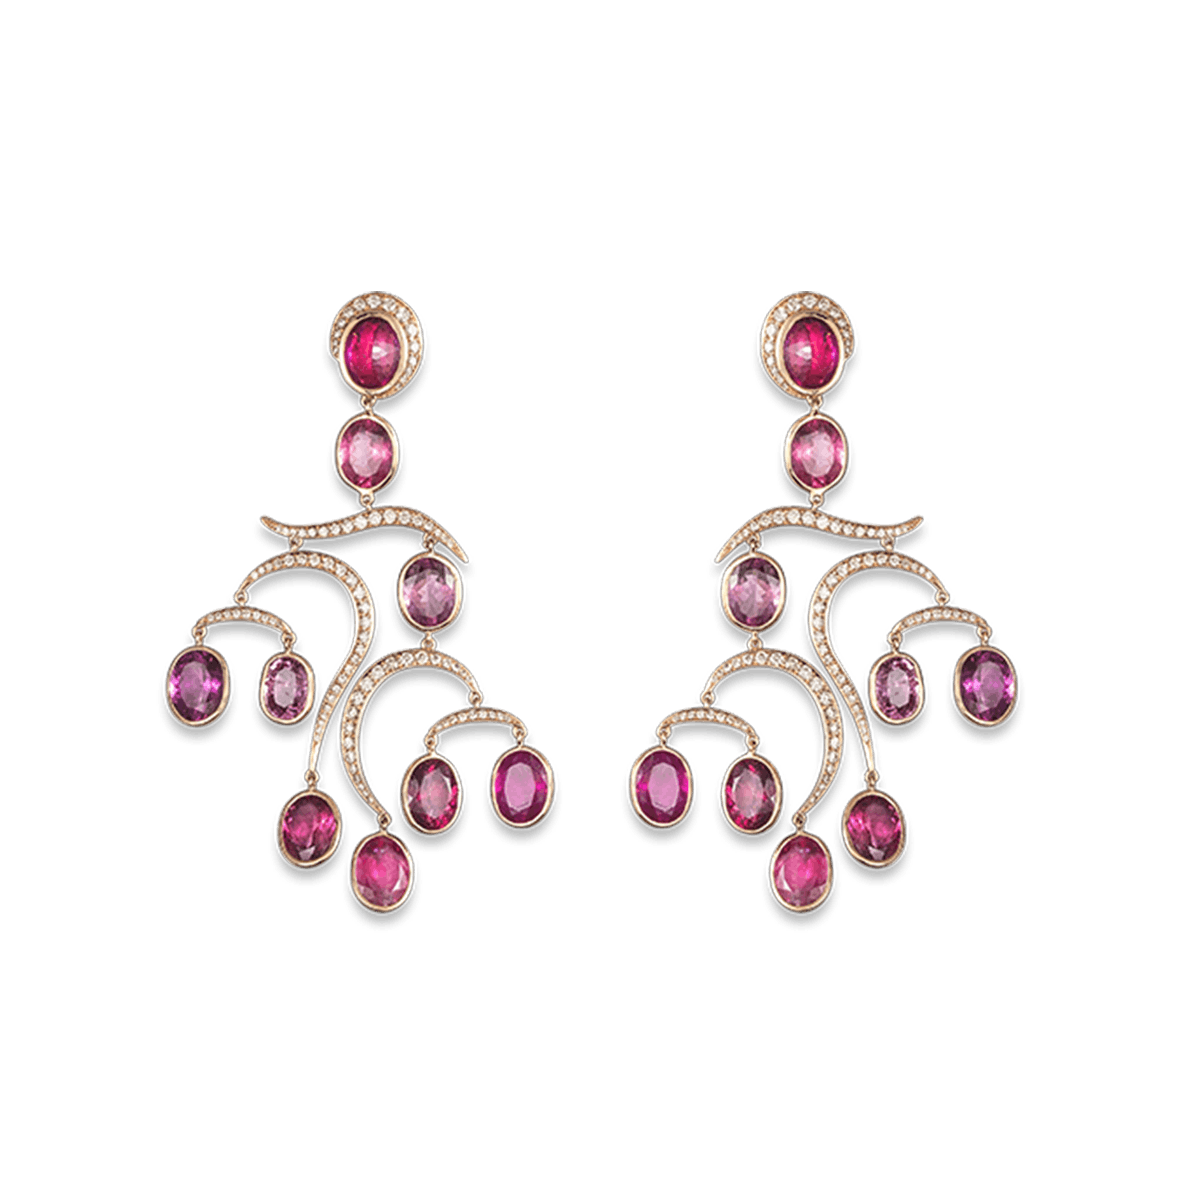 18k Rose Gold Earrings Diamond and Tourmaline - Sommertanz